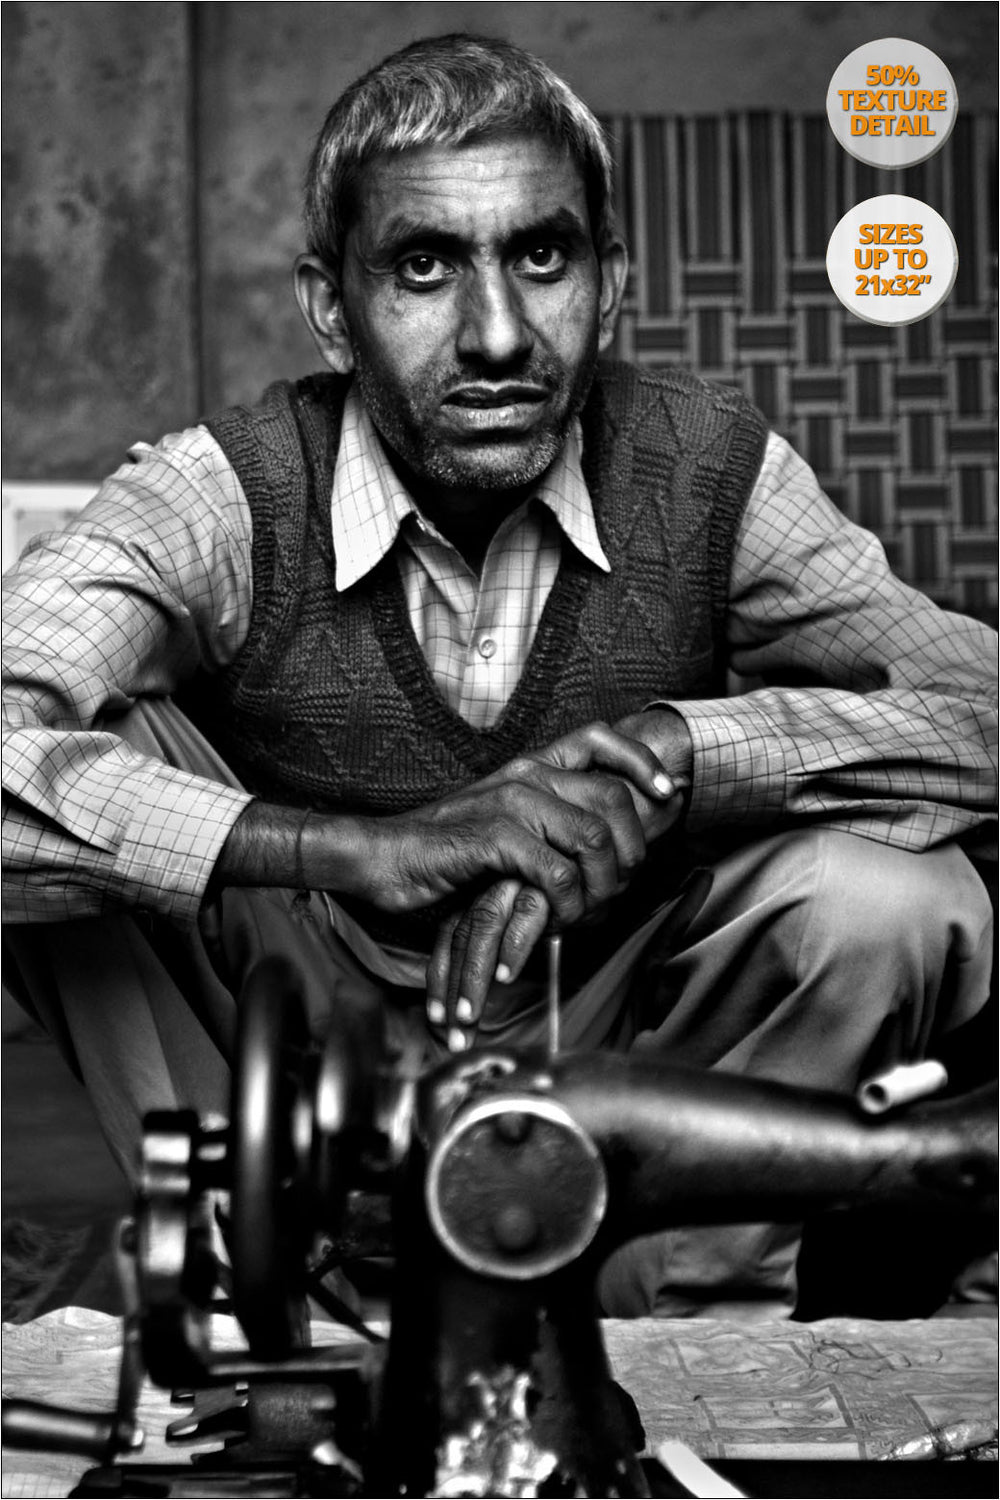 Tailor with his sewing machine, Chandigarh, India. | View of the Print at 50% magnification detail.